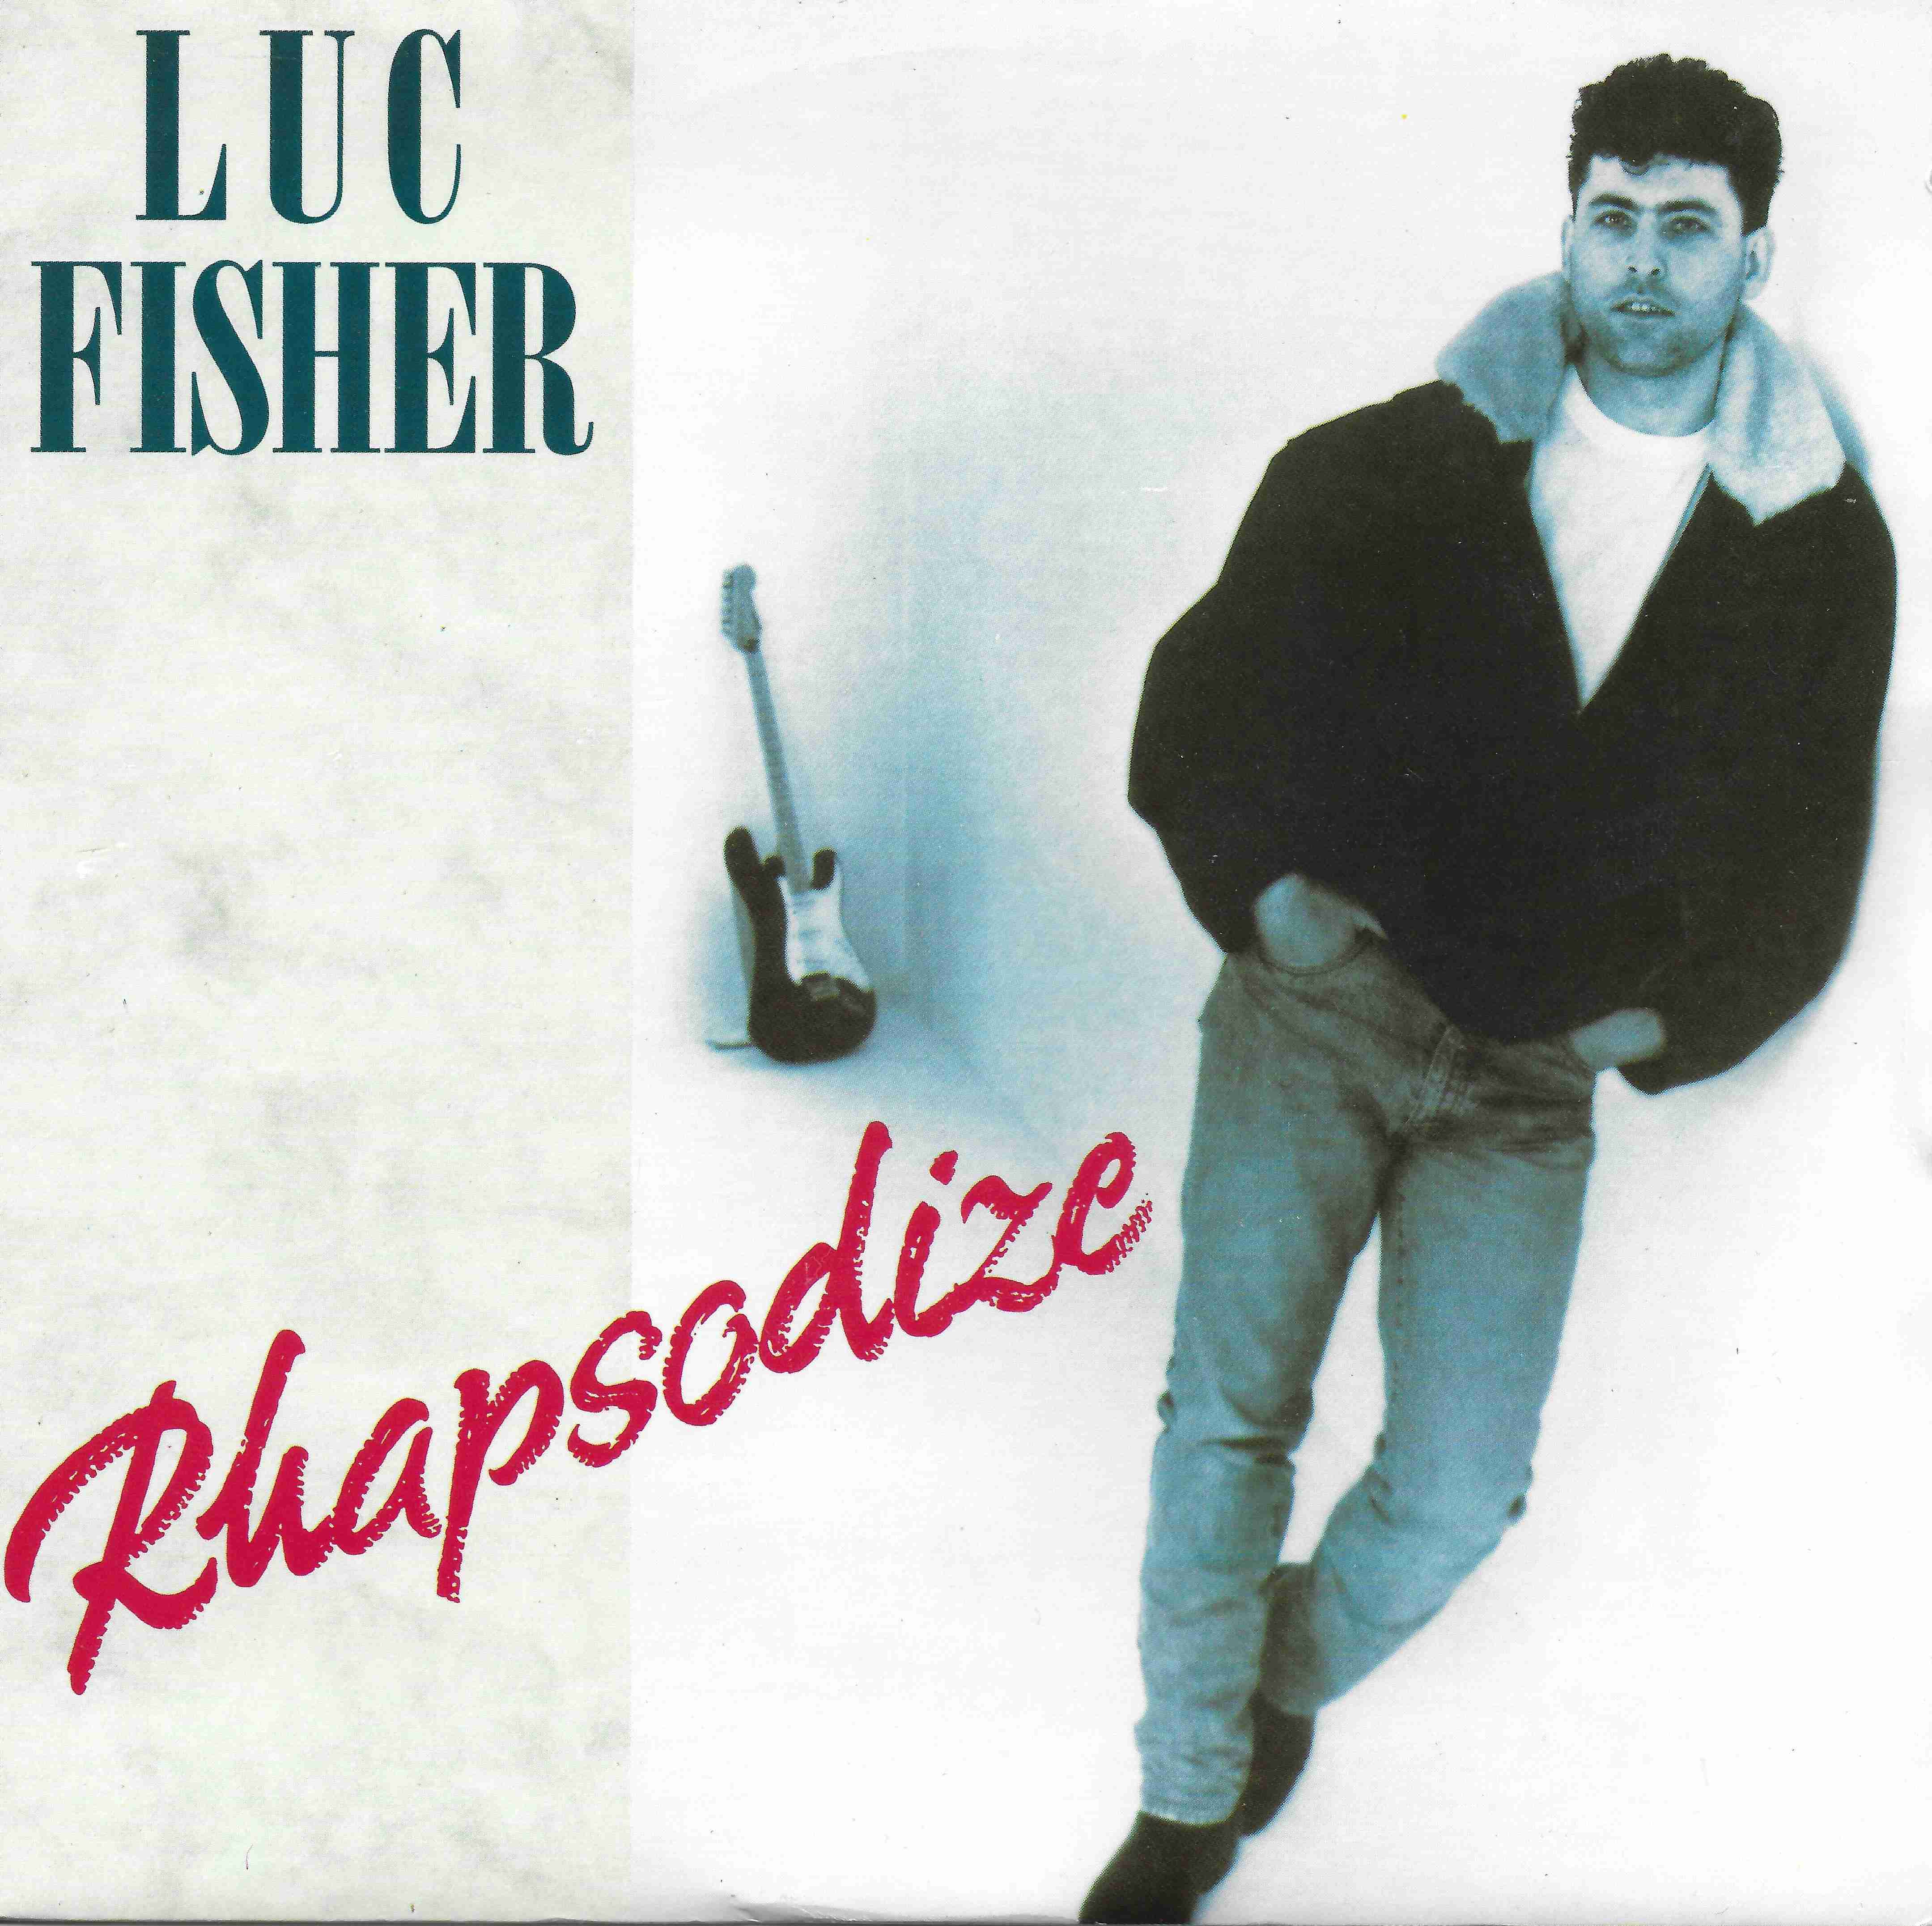 Picture of RESL 240 Rhapsodize by artist Luc Fisher from the BBC records and Tapes library